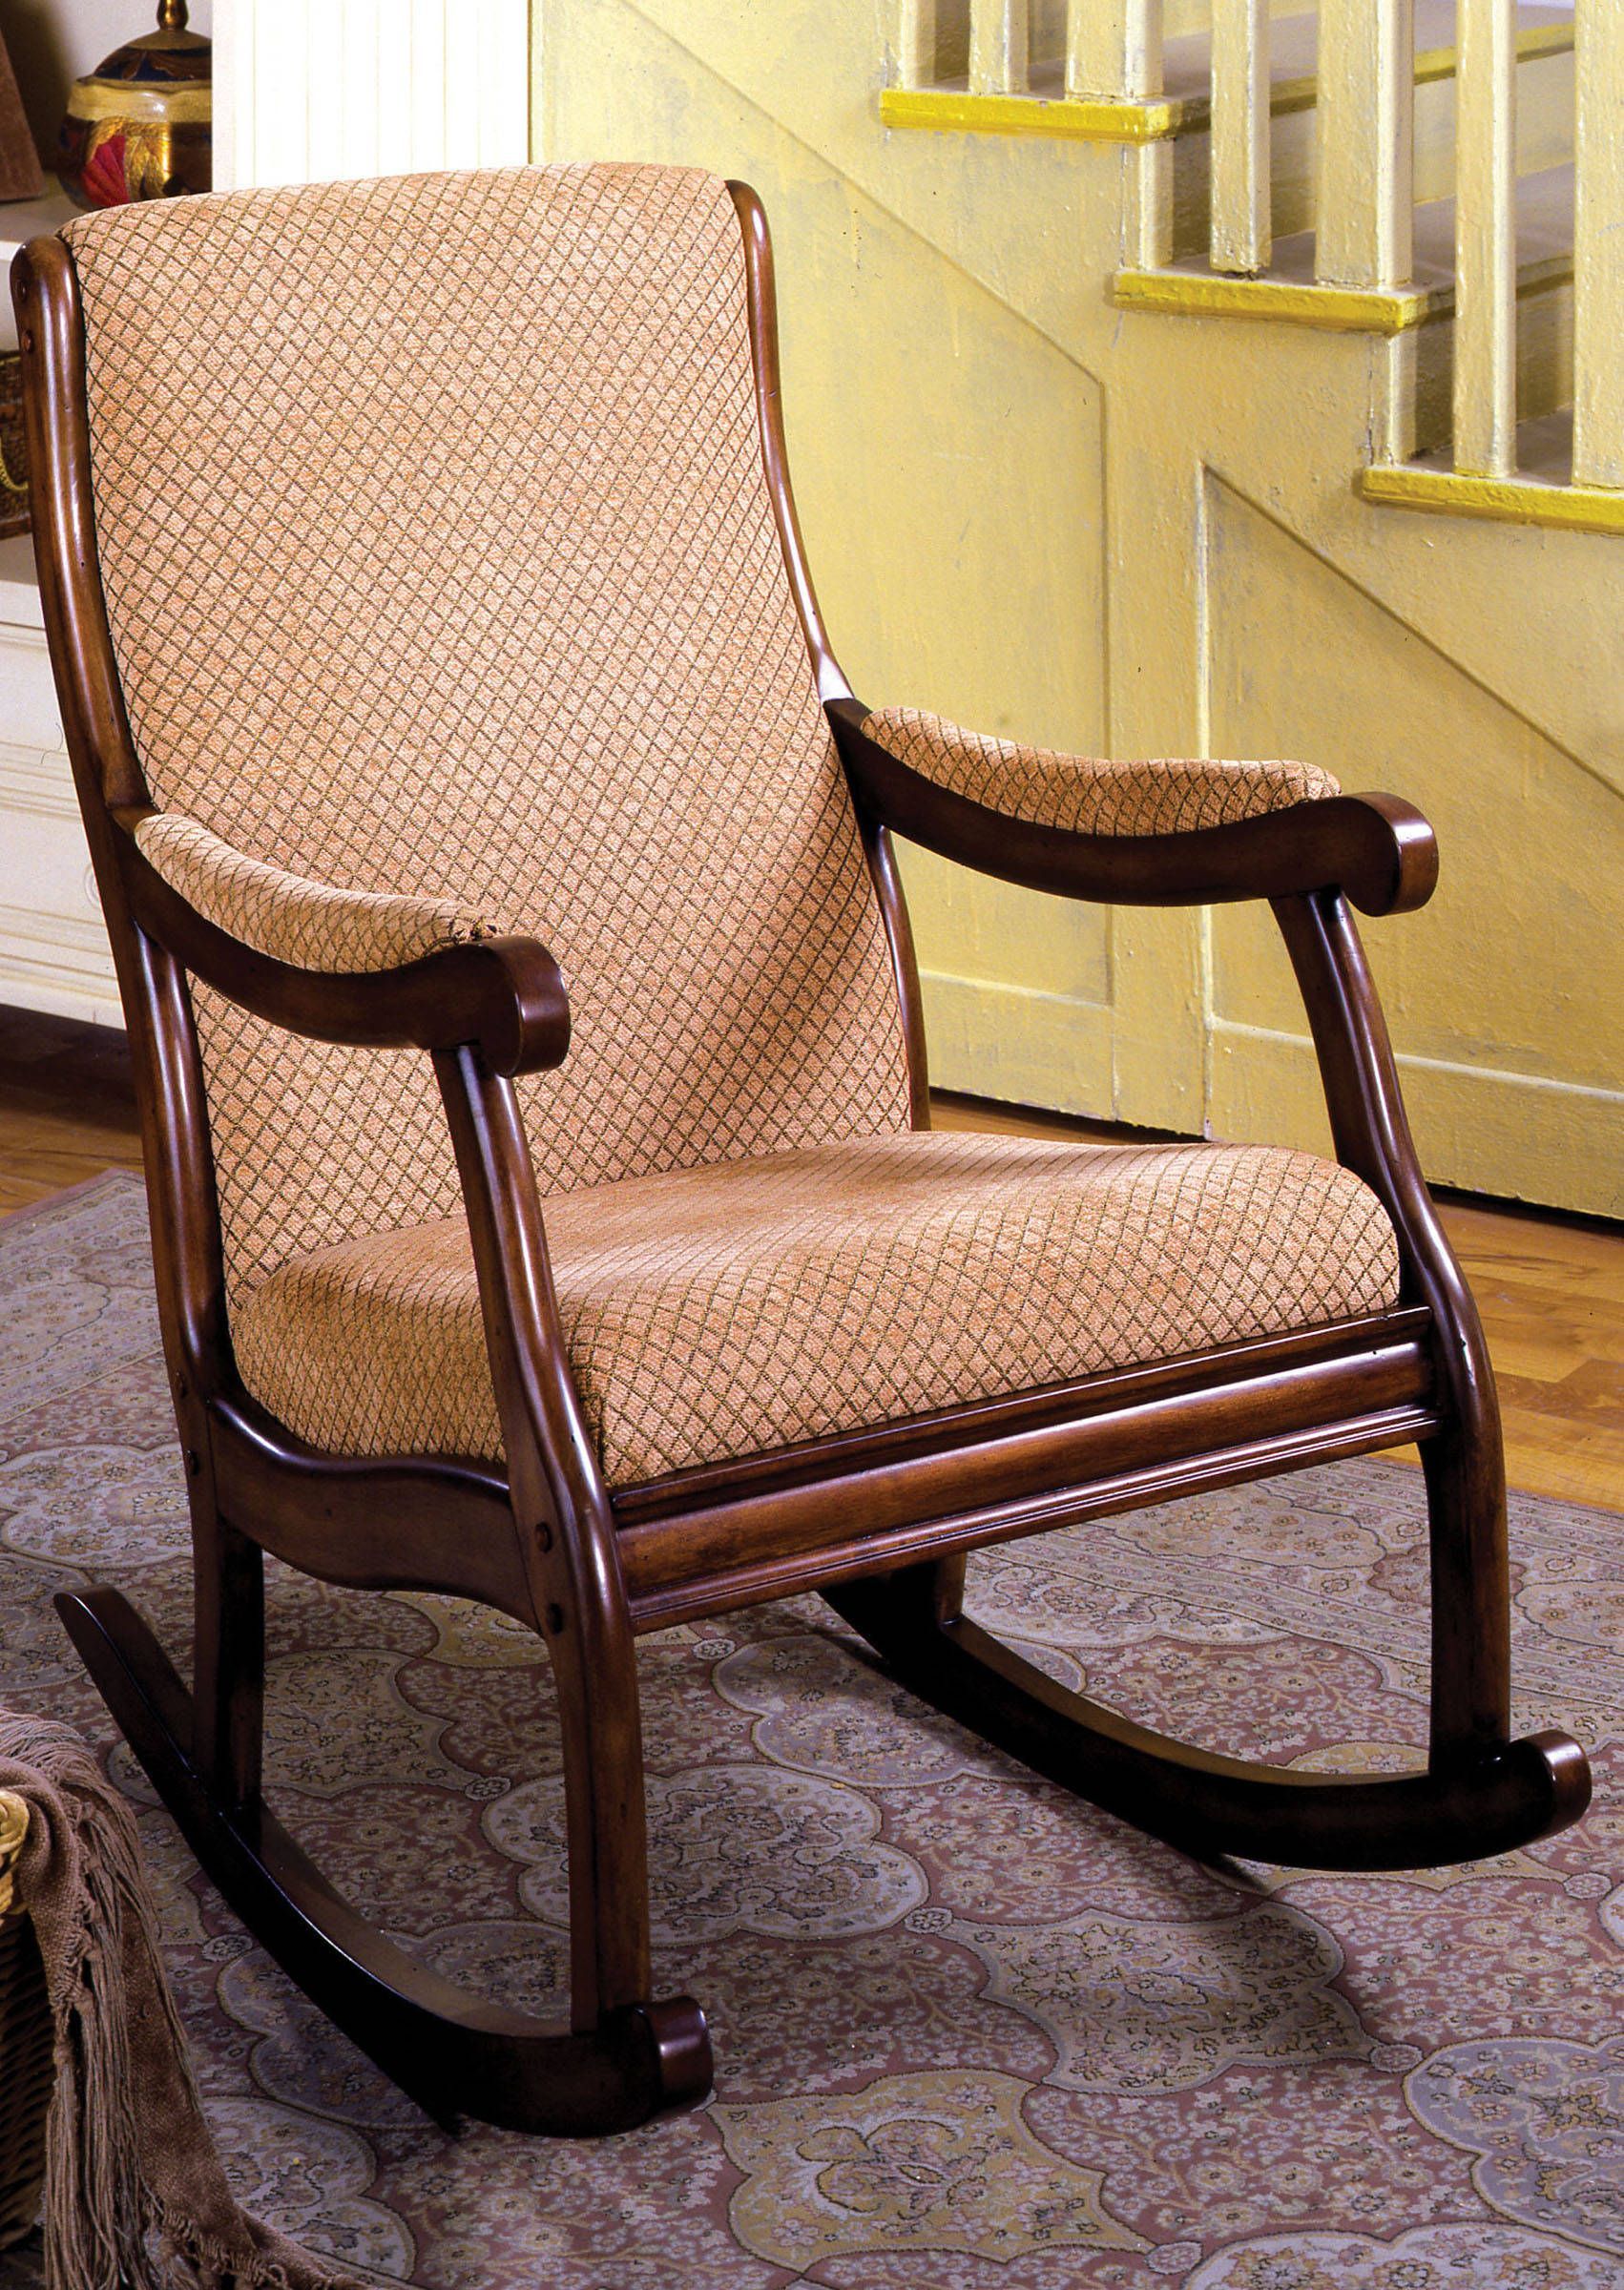 Furniture Of America Liverpool Rocking Chair | The Classy With Antique Transitional Warm Oak Rocking Chairs (View 8 of 20)